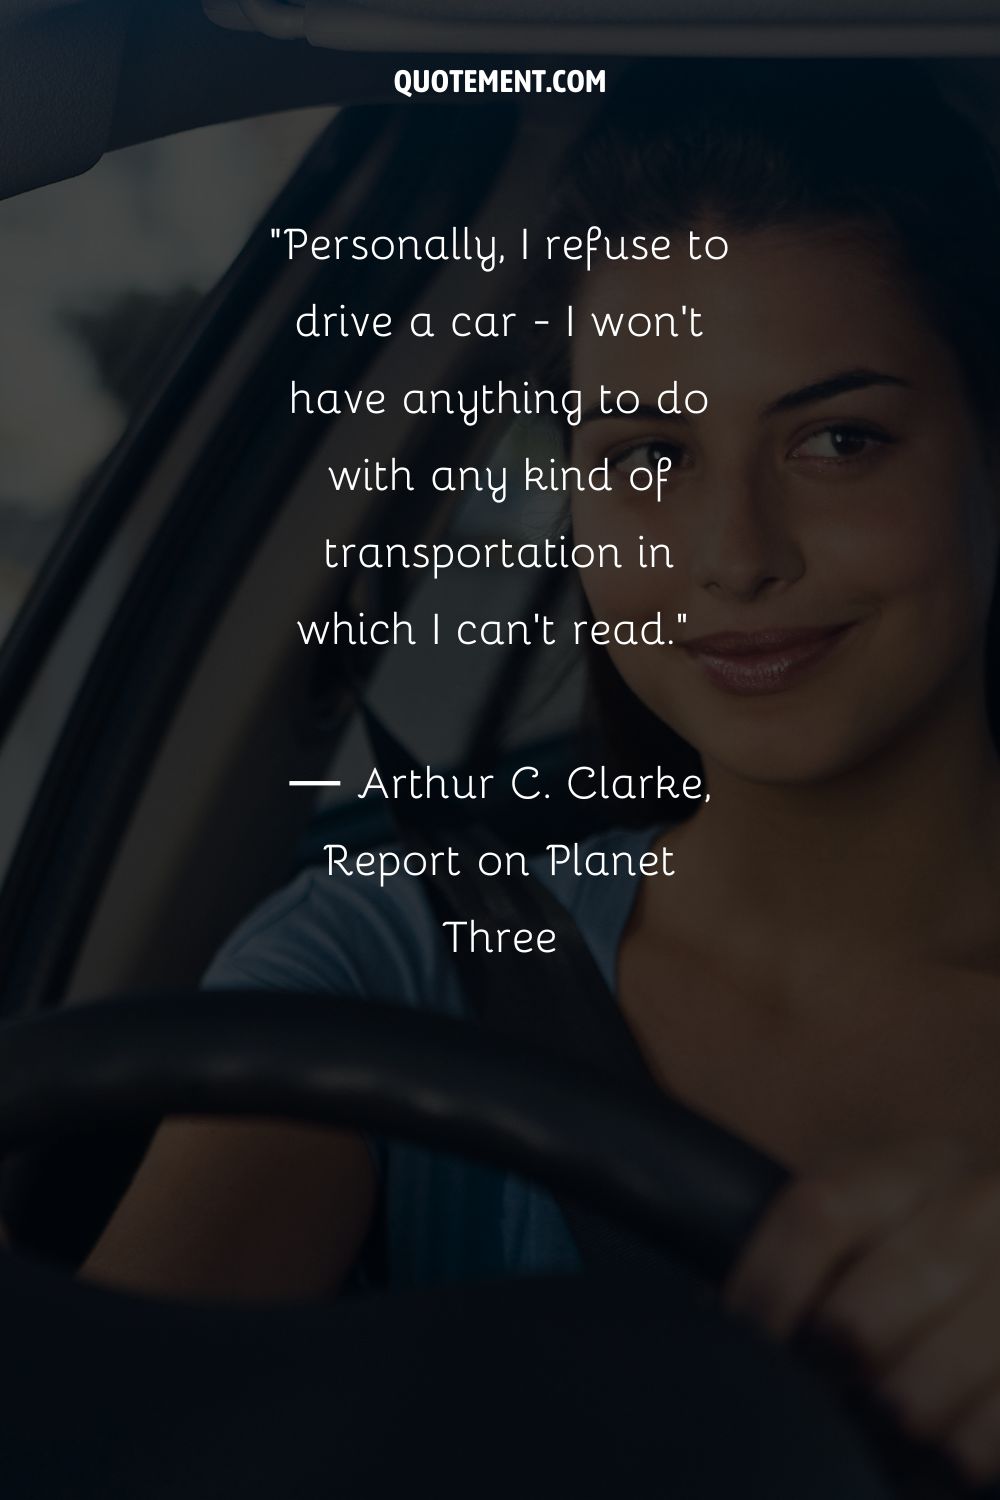 Personally, I refuse to drive a car - I won't have anything to do with any kind of transportation in which I can't read